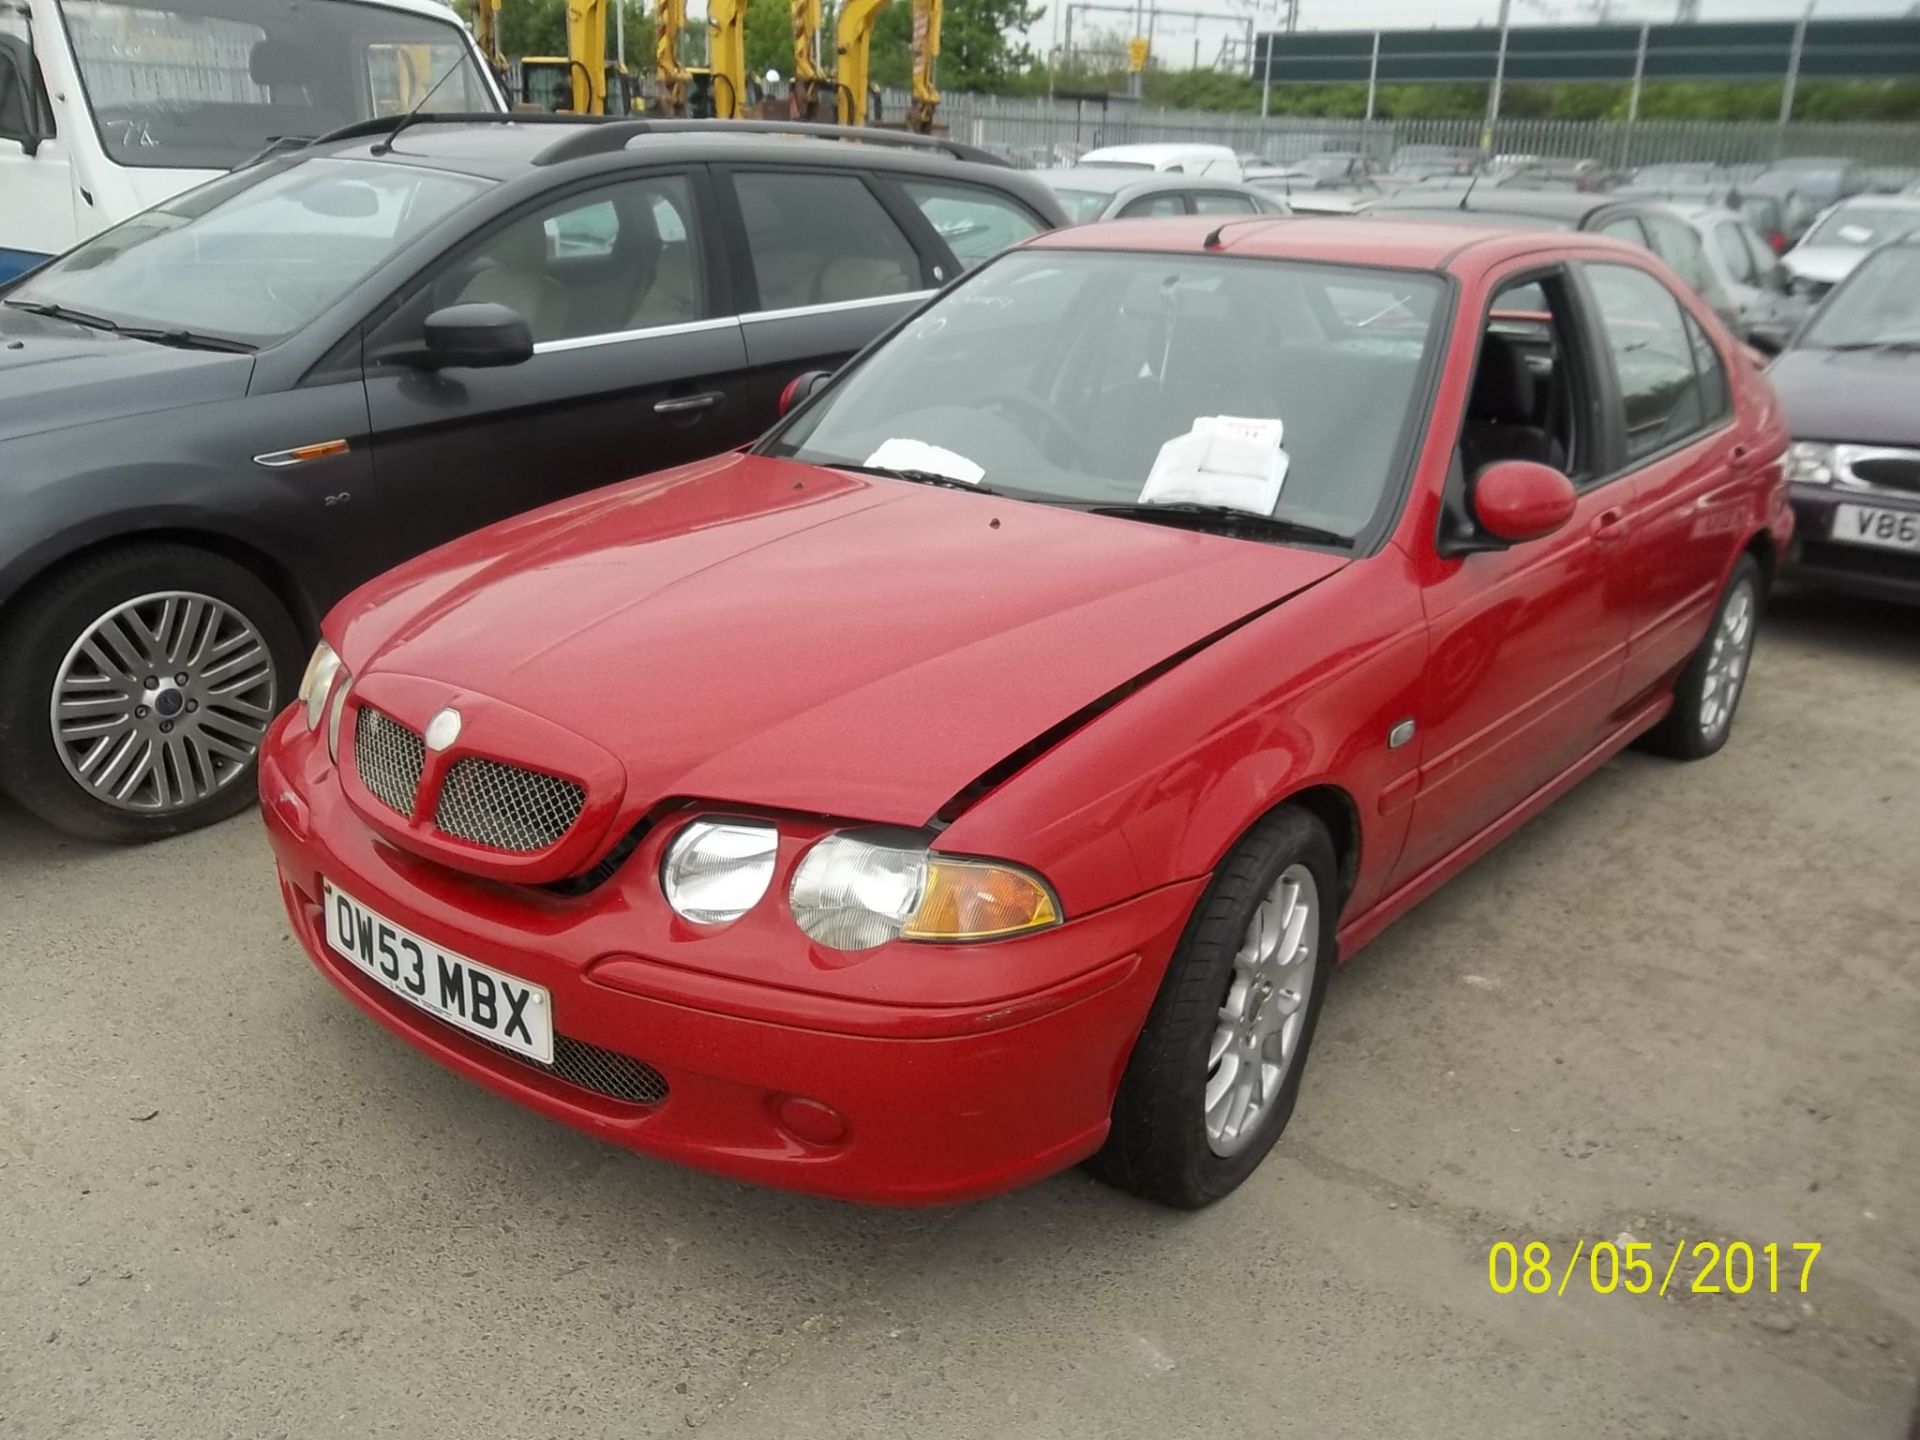 MG ZS+ 110 - OW53 MBX Date of registration: 28.01.2004 1588cc, petrol, manual, red Odometer - Image 2 of 4